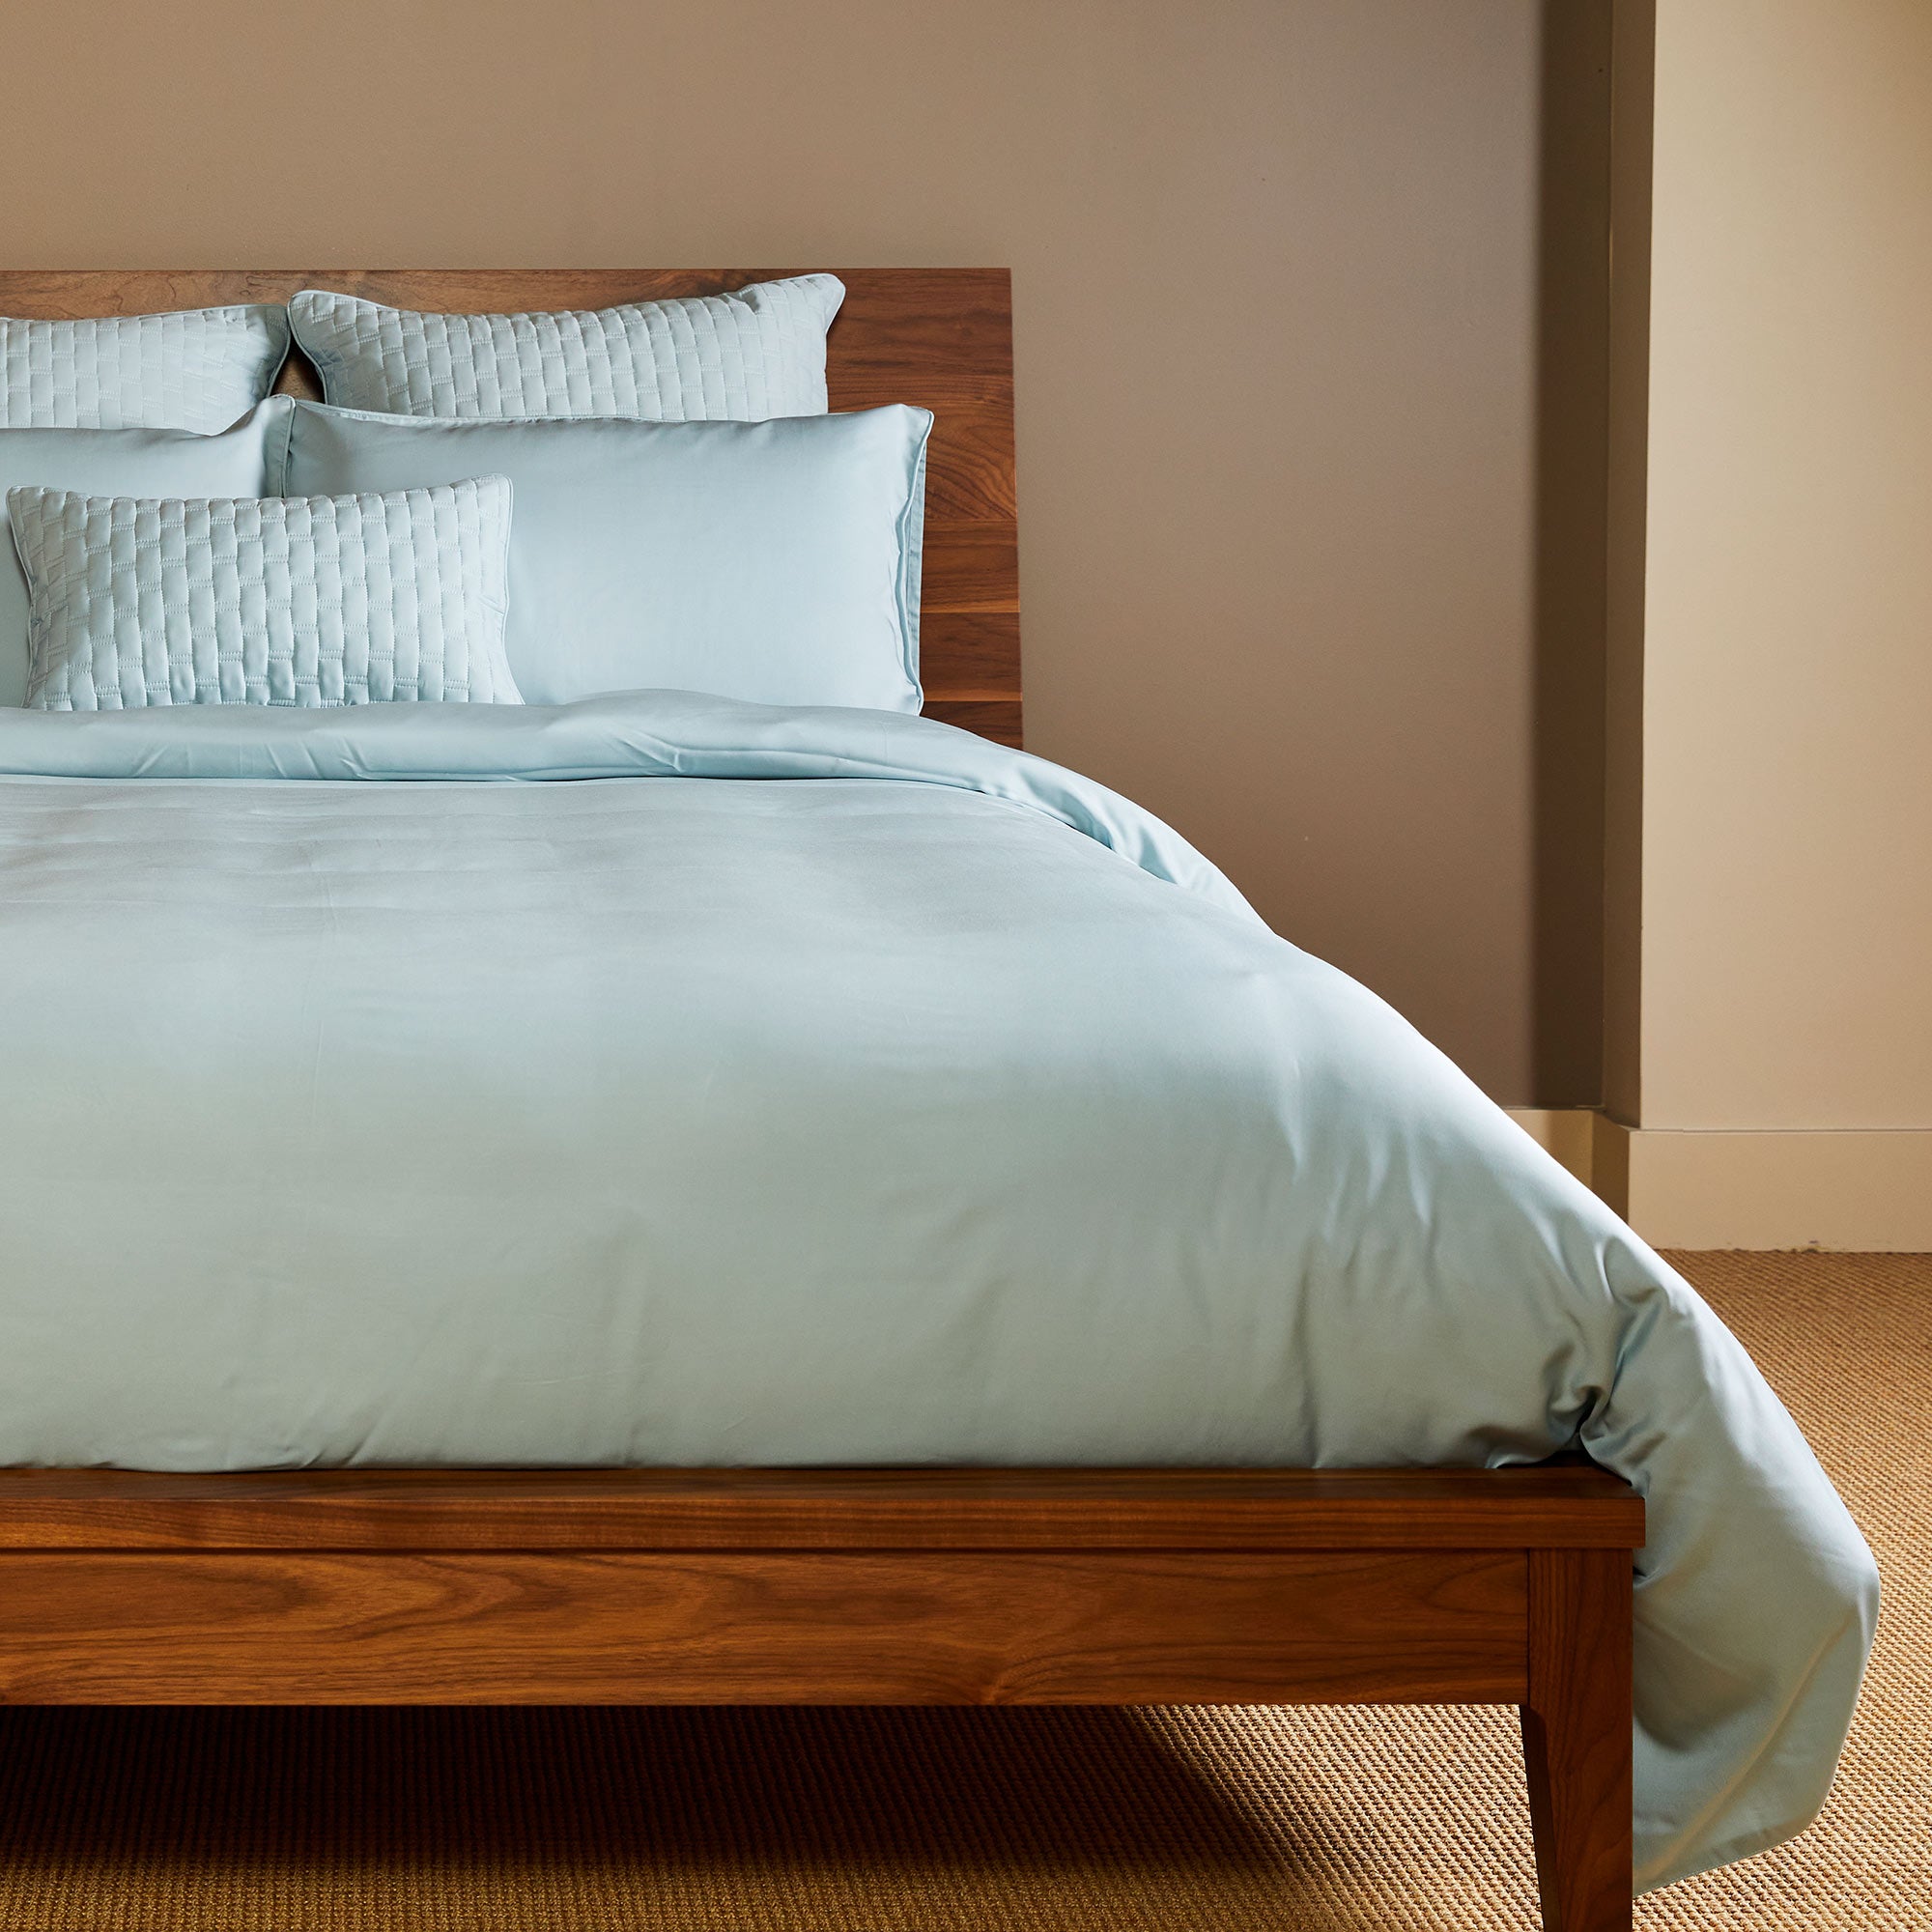 sky blue bamboo duvet cover on a pretty bamboo wood bed with pillows